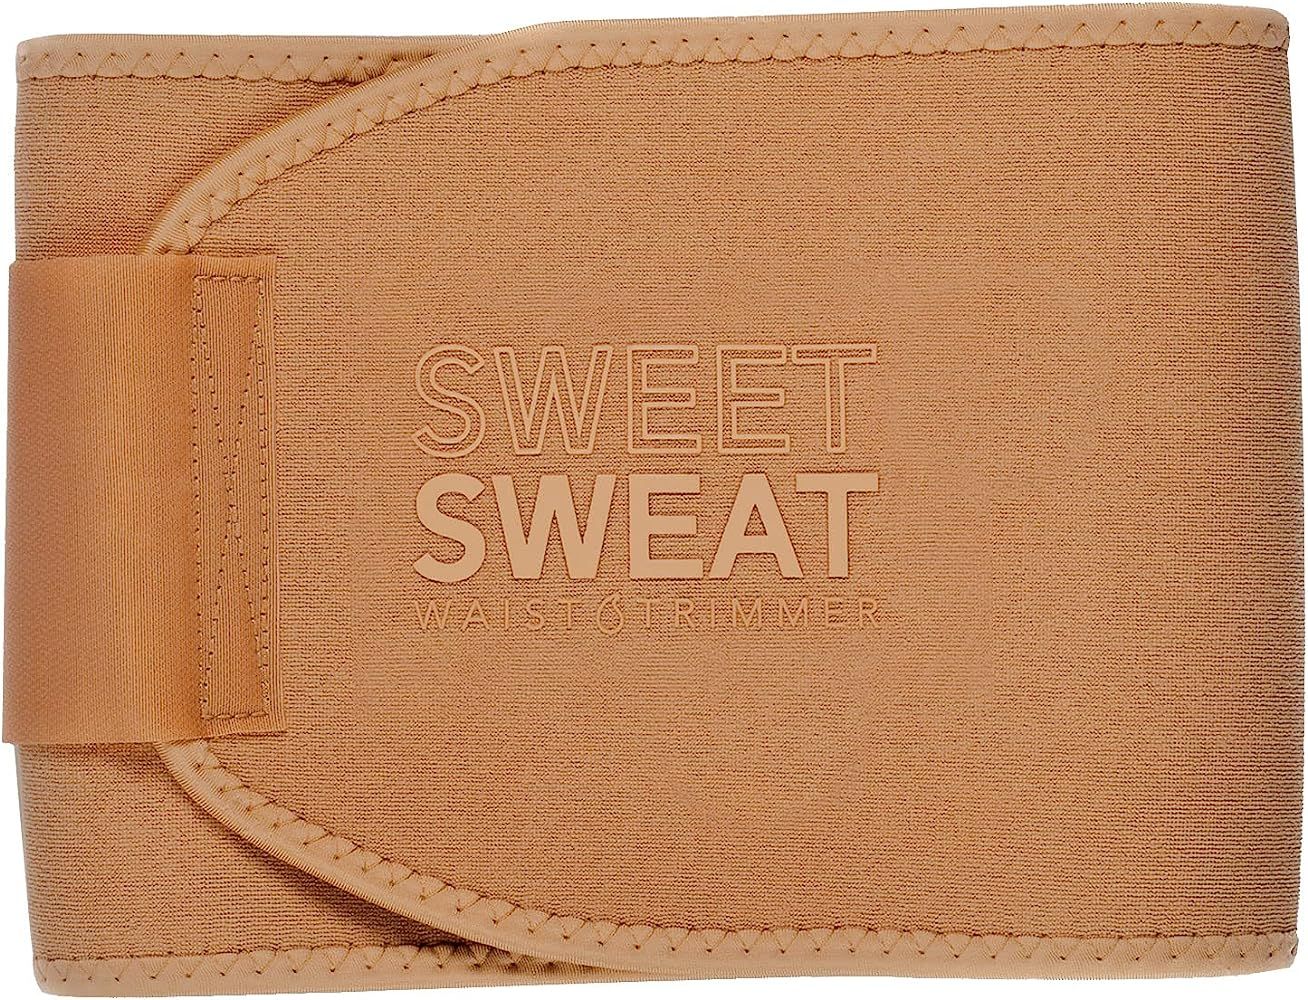 Sweet Sweat Waist Trimmer 'Toned' for Women and Men | Premium Waist Trainer Belt to Tone your Sto... | Amazon (US)